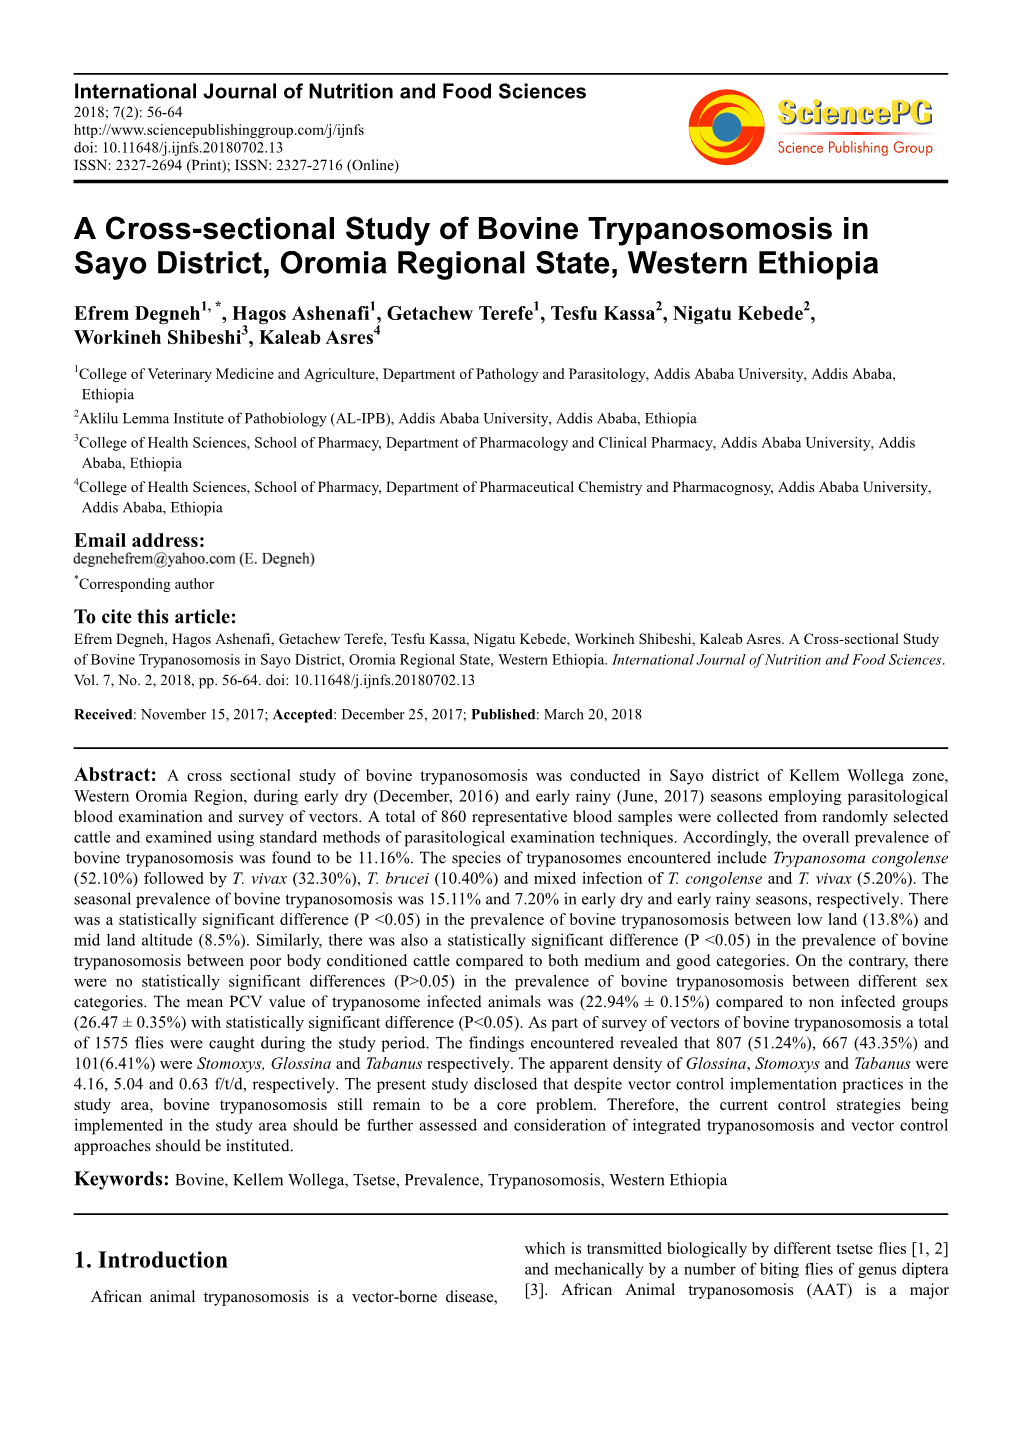 A Cross-Sectional Study of Bovine Trypanosomosis in Sayo District, Oromia Regional State, Western Ethiopia